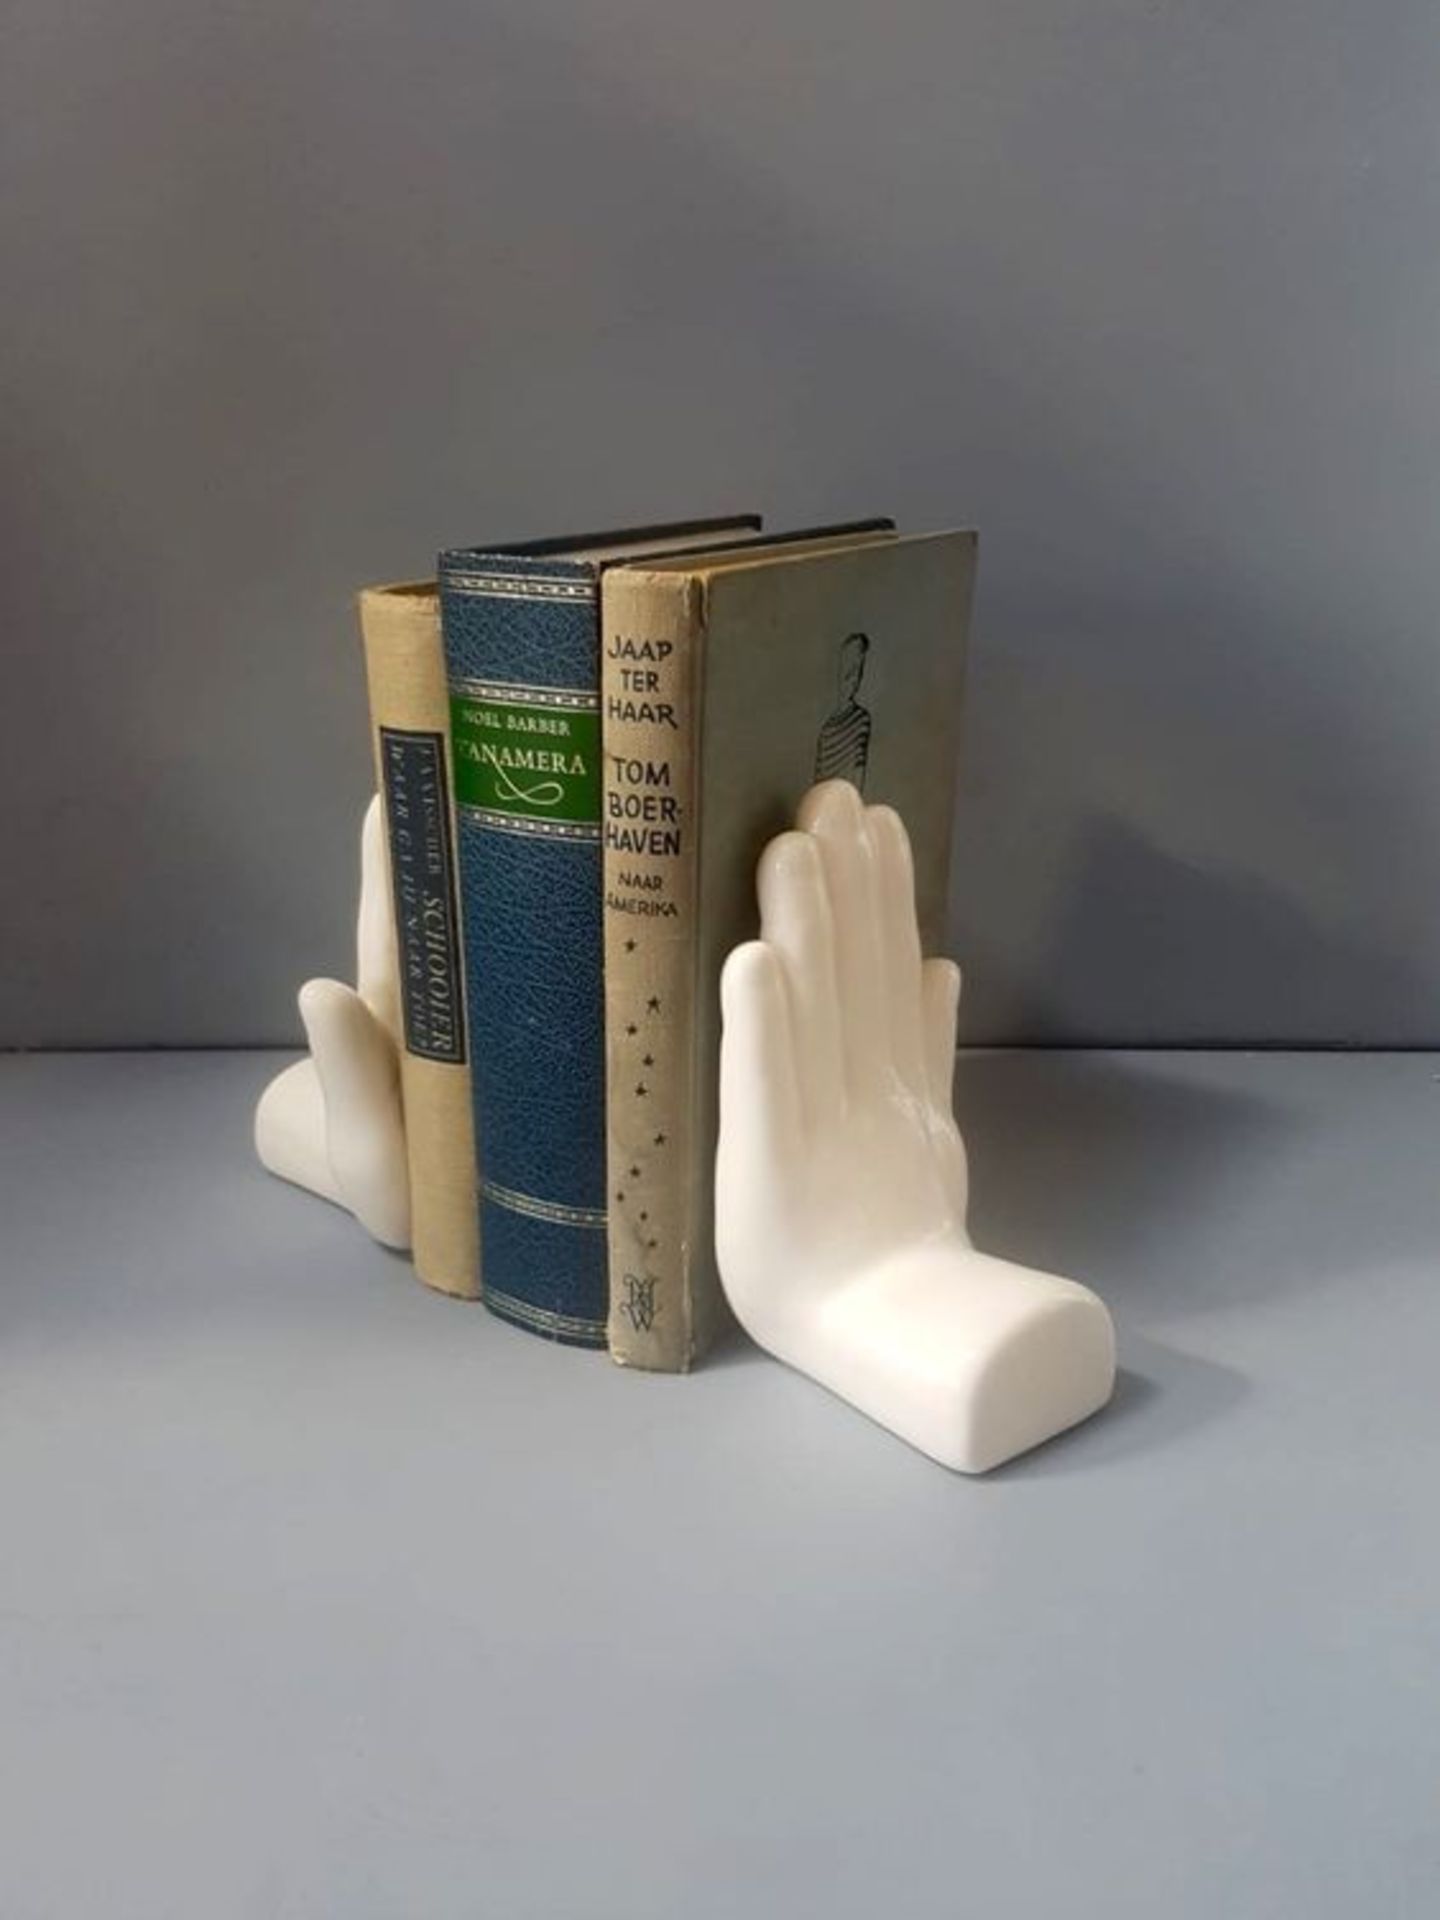 Vintage 1970s White Ceramic Hand Shaped Bookends (Apt 16)